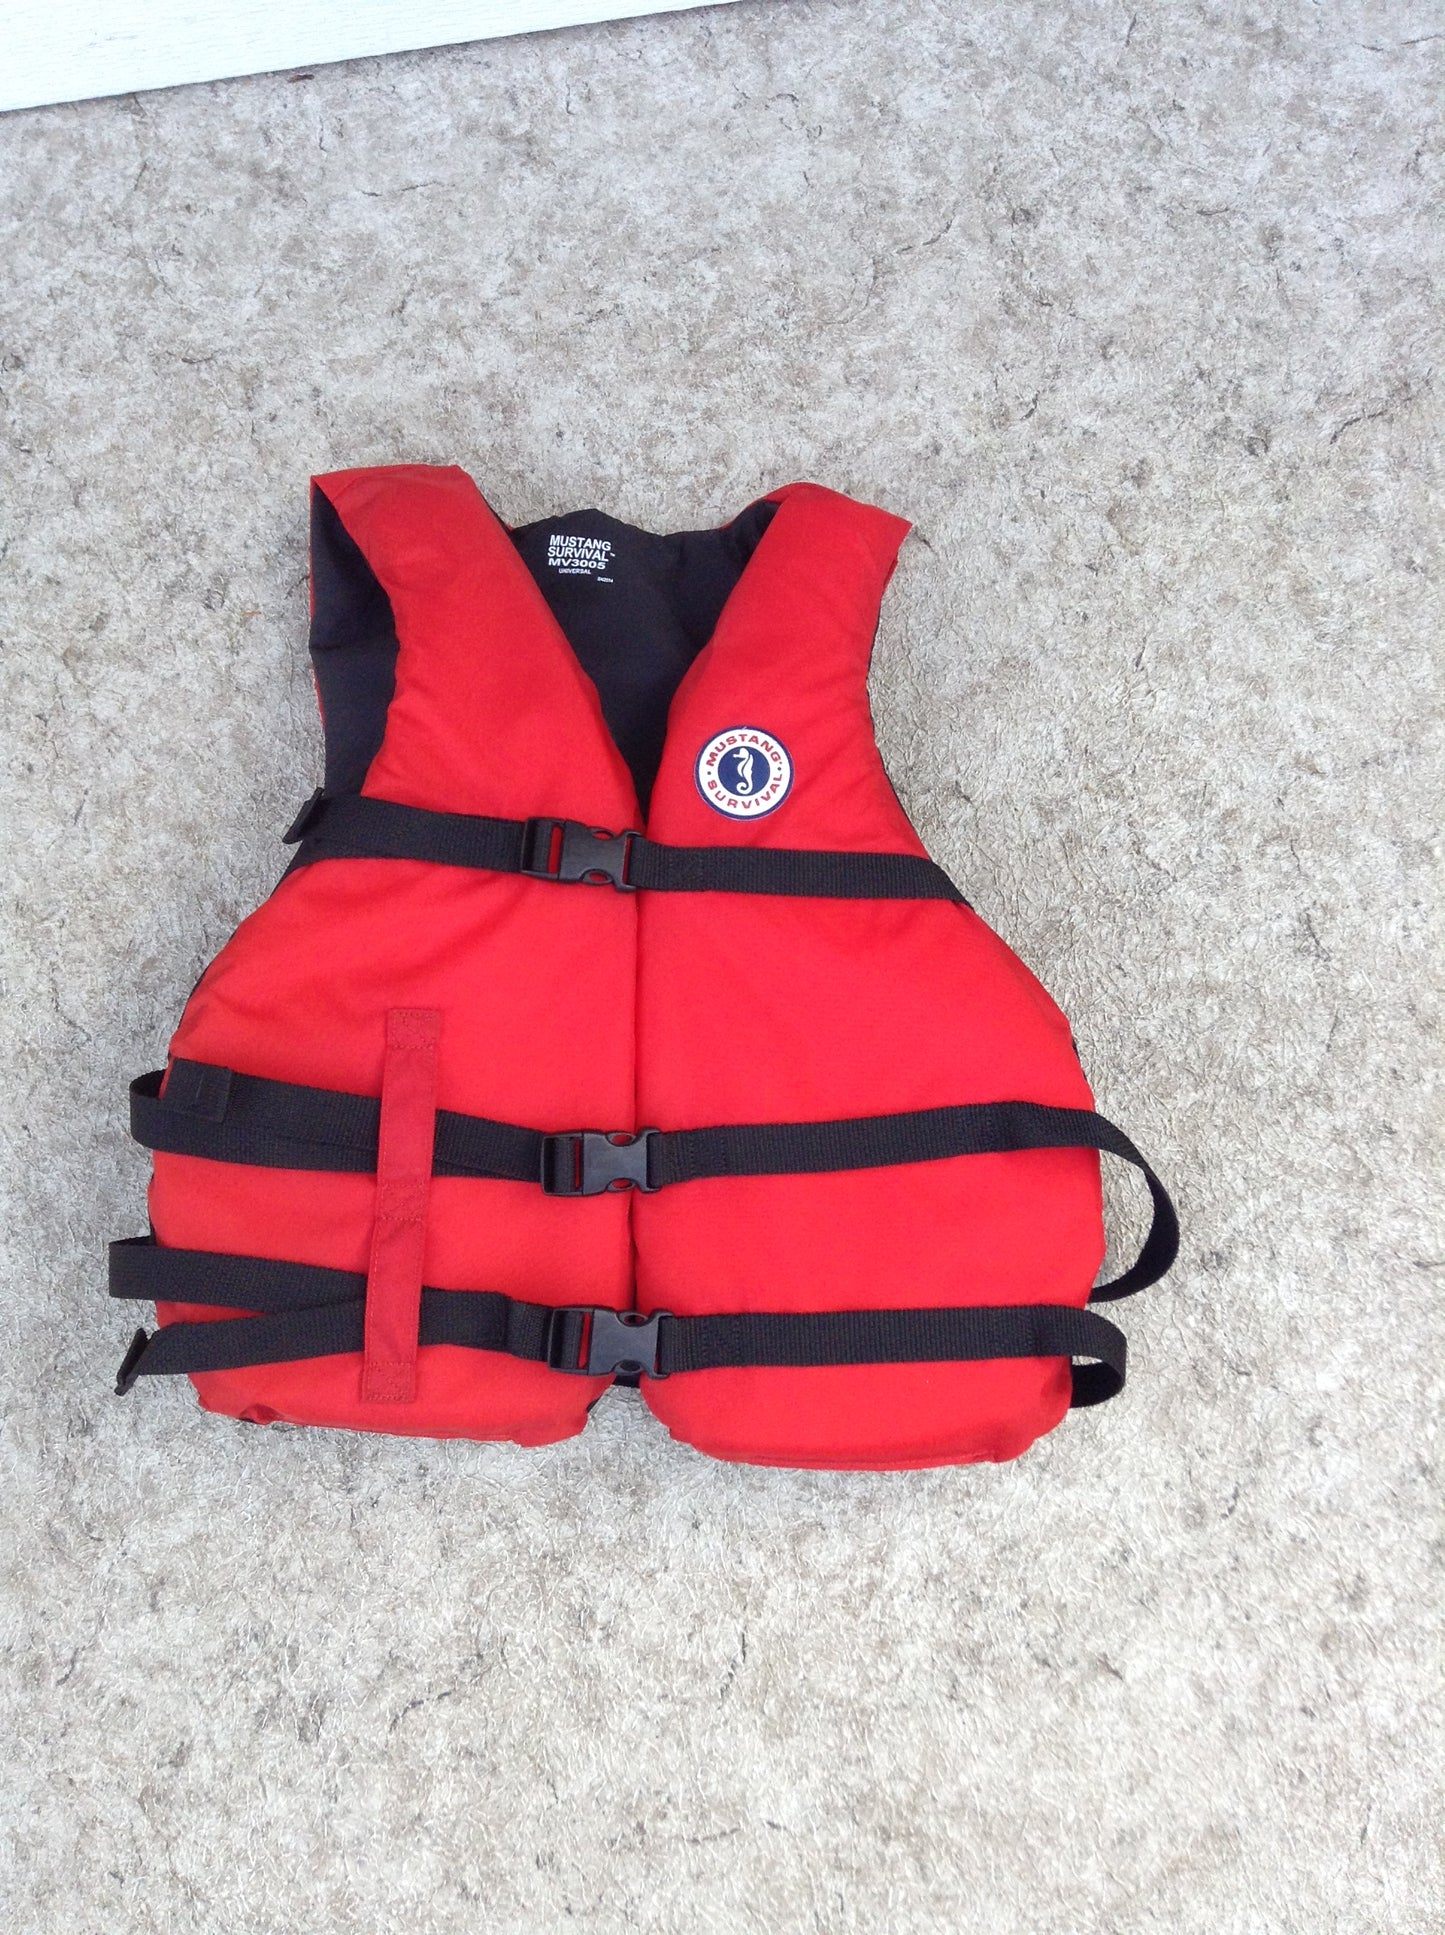 Life Jacket Adult Universal One Size 90-200 lb Adjustable Mustang Survival Black Red New Demo Model